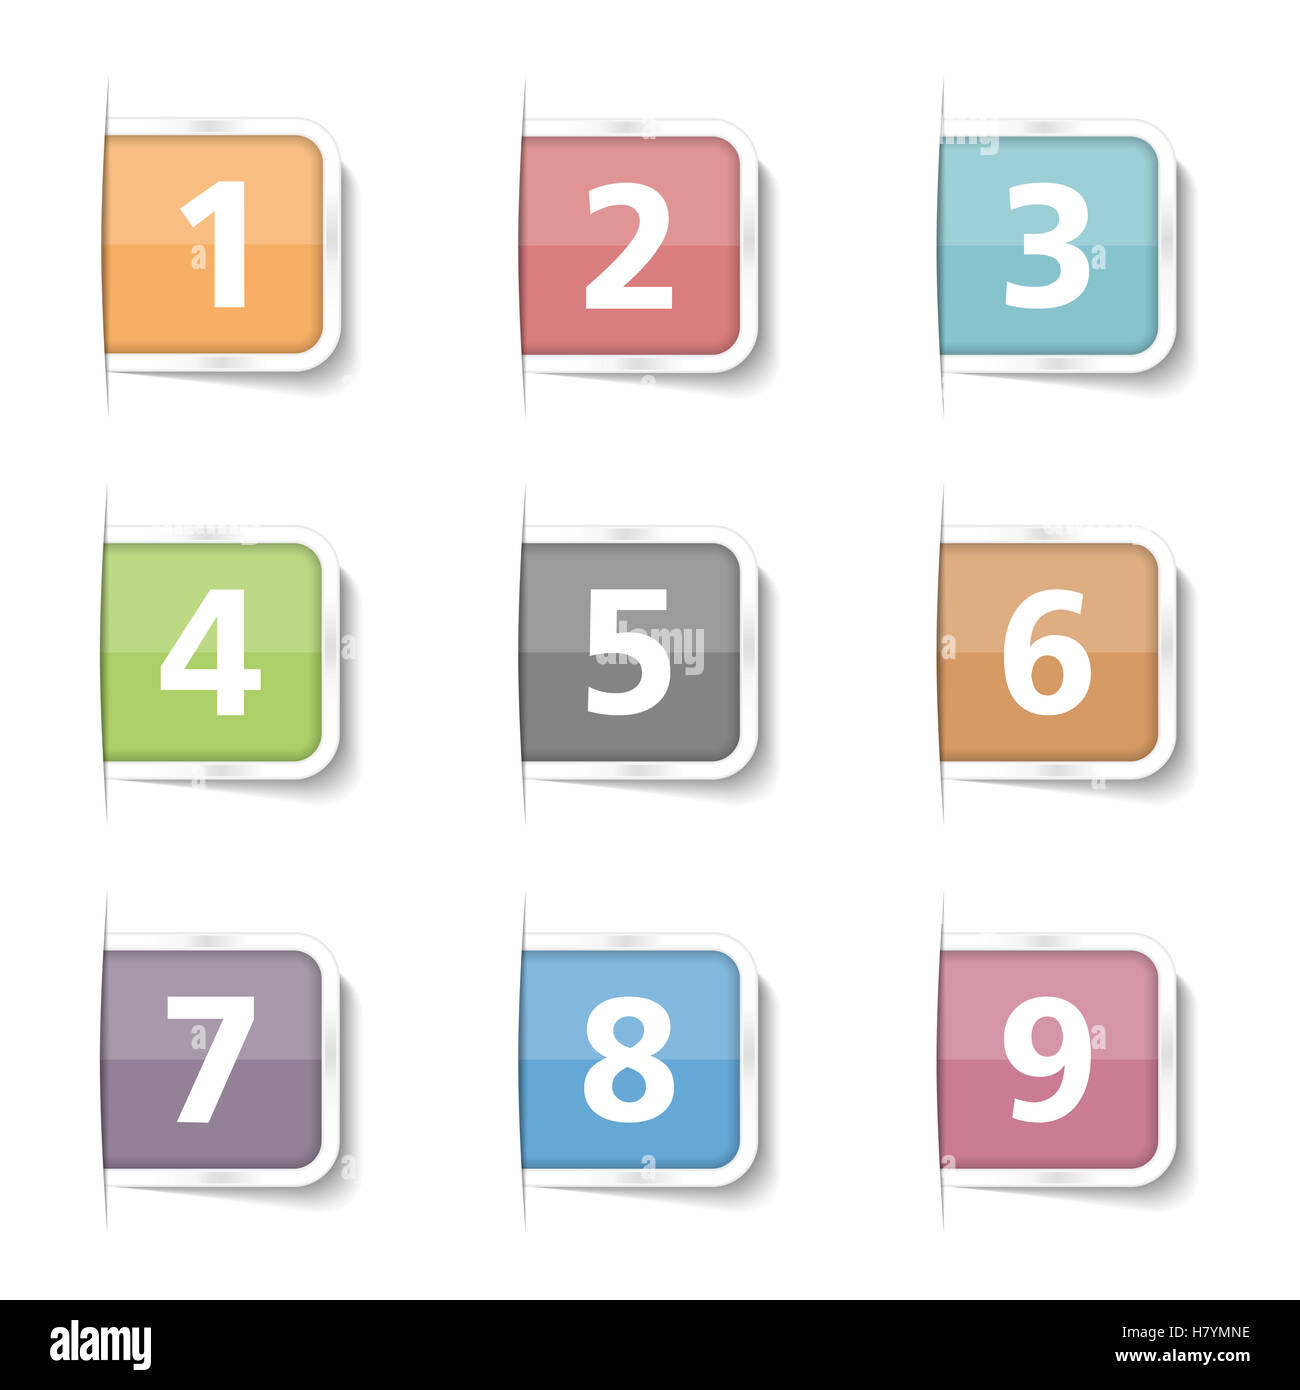 Tabs with numbers 1-9 Stock Photo